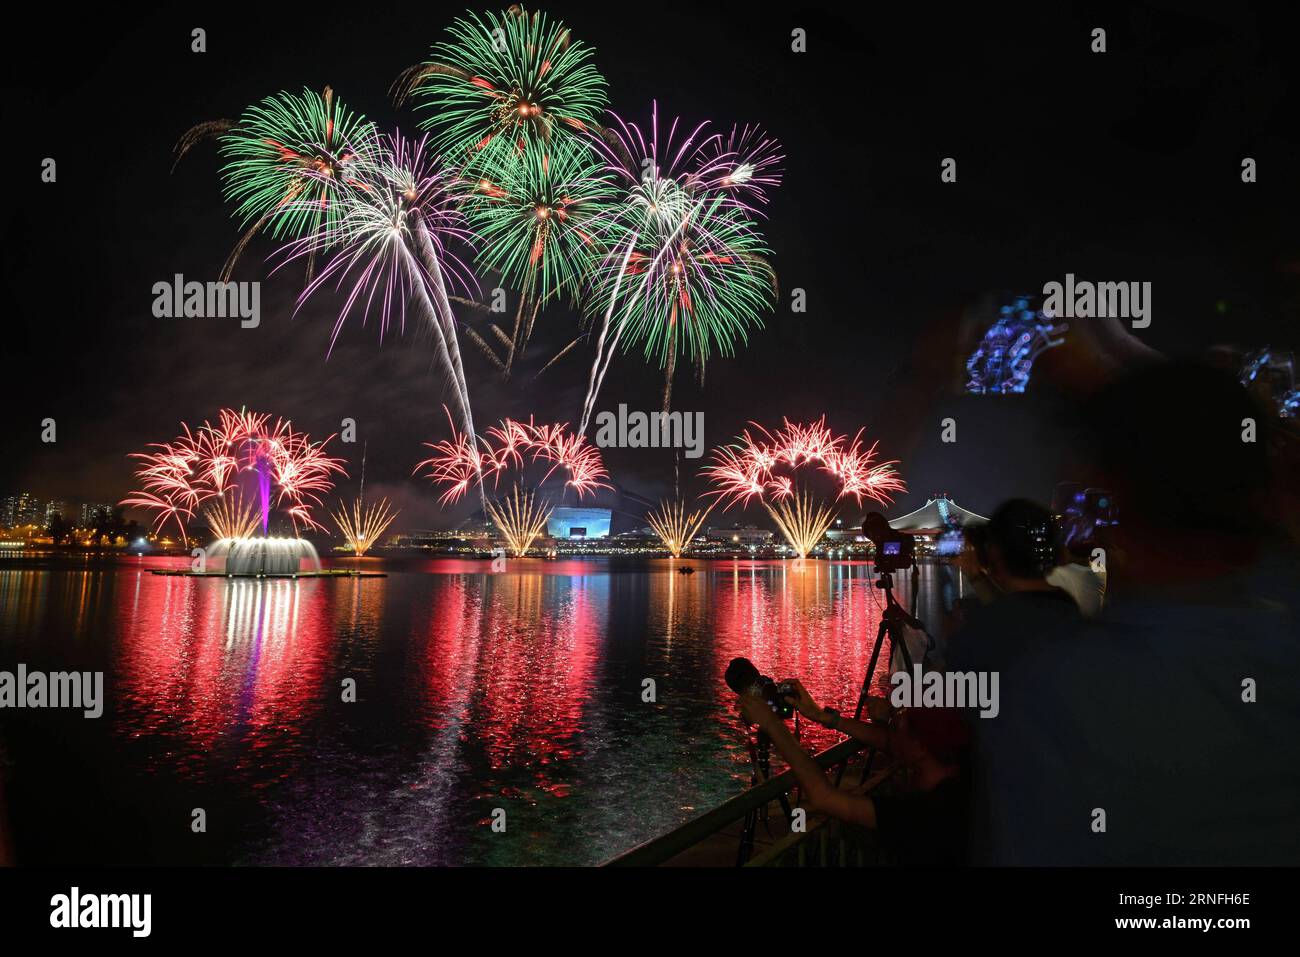 (160809) -- SINGAPORE, Aug. 9, 2016 -- Colourful fireworks light up the sky during the National Day Parade held at Singapore s National Stadium, Aug. 9, 2016. Singapore celebrated its 51st anniversary of independence on Tuesday with this year s National Day Parade (NDP) focusing on imagining the future, and uniting Singaporeans in the next chapter of nation-building. ) (zjy) SINGAPORE-NATIONAL DAY PARADE-ANNIVERSARY OF INDEPENDENCE ThenxChihxWey PUBLICATIONxNOTxINxCHN   160809 Singapore Aug 9 2016 COLOURFUL Fireworks Light up The Sky during The National Day Parade Hero AT Singapore S National Stock Photo